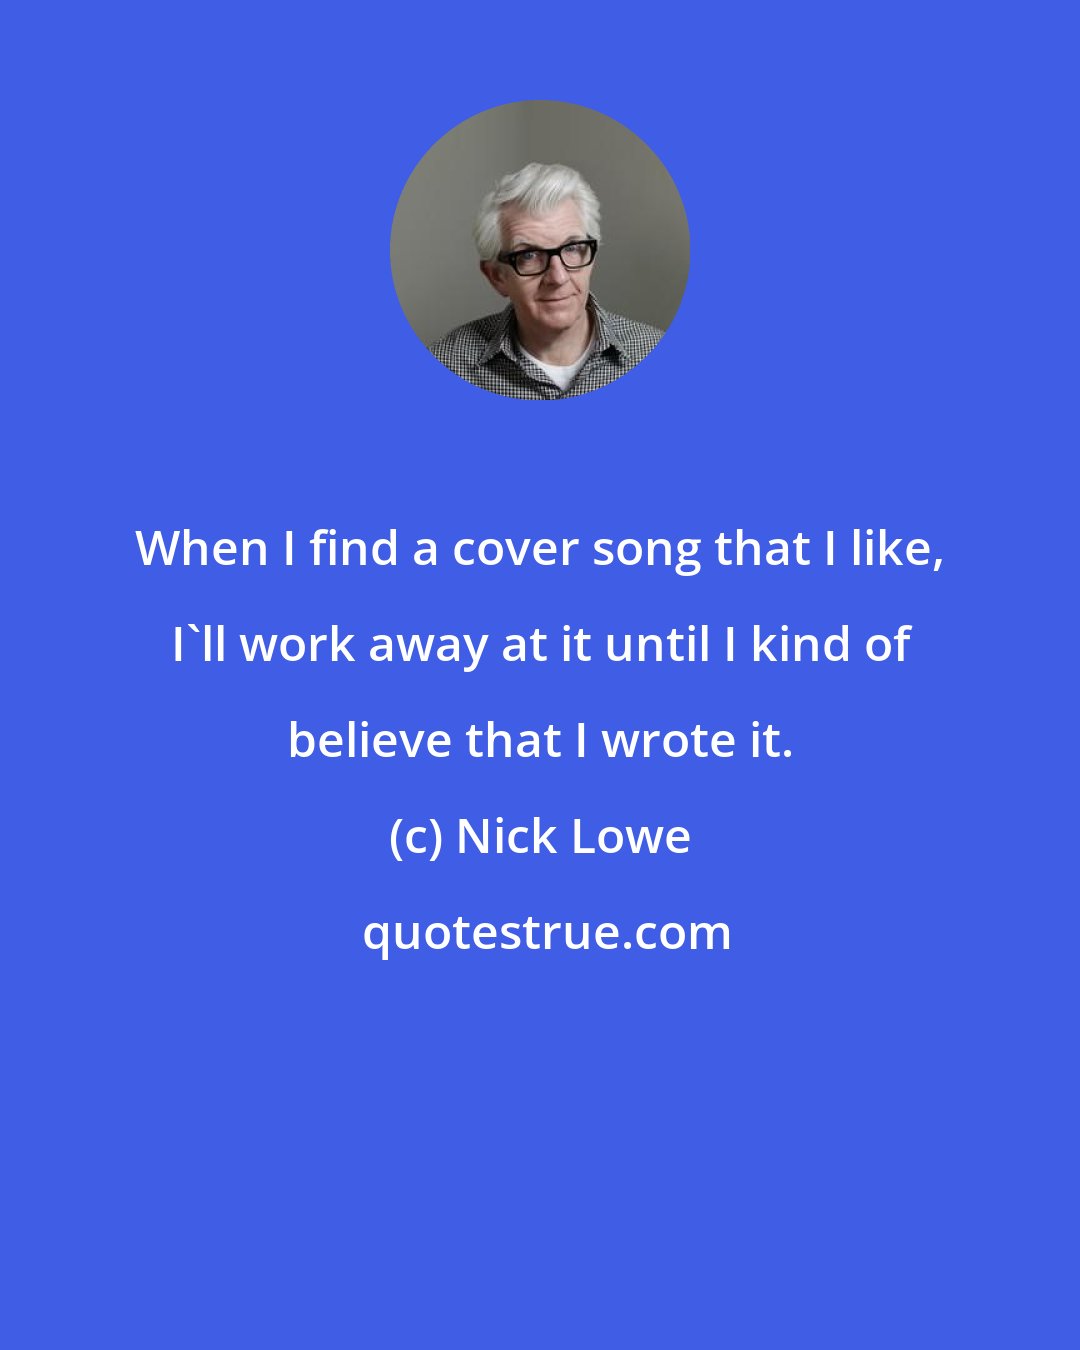 Nick Lowe: When I find a cover song that I like, I'll work away at it until I kind of believe that I wrote it.